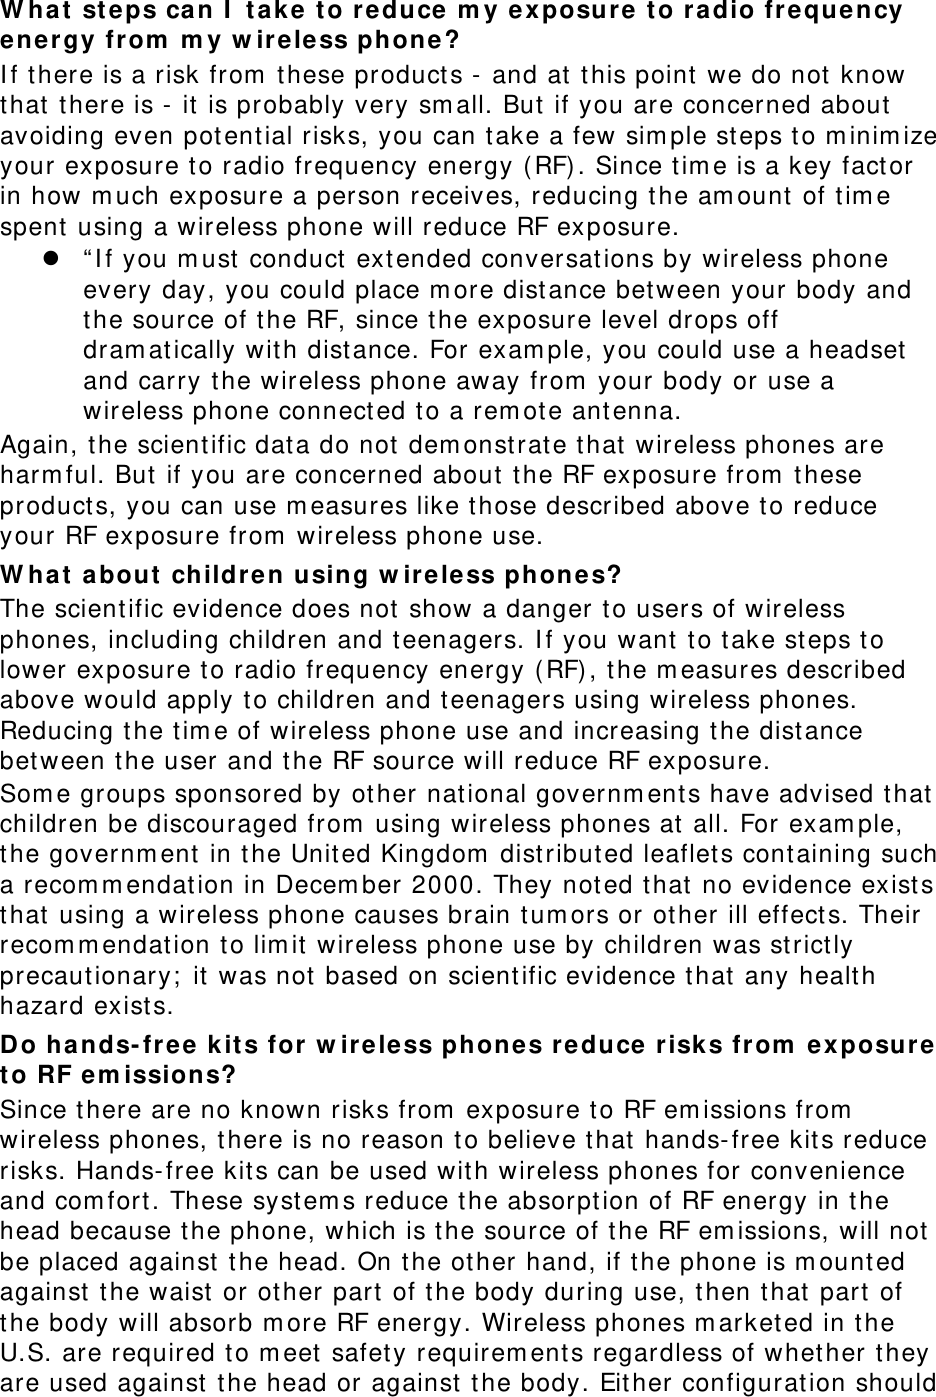 What steps can I take to reduce my exposure to radio frequency energy from my wireless phone? If there is a risk from these products - and at this point we do not know that there is - it is probably very small. But if you are concerned about avoiding even potential risks, you can take a few simple steps to minimize your exposure to radio frequency energy (RF). Since time is a key factor in how much exposure a person receives, reducing the amount of time spent using a wireless phone will reduce RF exposure. z “If you must conduct extended conversations by wireless phone every day, you could place more distance between your body and the source of the RF, since the exposure level drops off dramatically with distance. For example, you could use a headset and carry the wireless phone away from your body or use a wireless phone connected to a remote antenna. Again, the scientific data do not demonstrate that wireless phones are harmful. But if you are concerned about the RF exposure from these products, you can use measures like those described above to reduce your RF exposure from wireless phone use. What about children using wireless phones? The scientific evidence does not show a danger to users of wireless phones, including children and teenagers. If you want to take steps to lower exposure to radio frequency energy (RF), the measures described above would apply to children and teenagers using wireless phones. Reducing the time of wireless phone use and increasing the distance between the user and the RF source will reduce RF exposure. Some groups sponsored by other national governments have advised that children be discouraged from using wireless phones at all. For example, the government in the United Kingdom distributed leaflets containing such a recommendation in December 2000. They noted that no evidence exists that using a wireless phone causes brain tumors or other ill effects. Their recommendation to limit wireless phone use by children was strictly precautionary; it was not based on scientific evidence that any health hazard exists.  Do hands-free kits for wireless phones reduce risks from exposure to RF emissions? Since there are no known risks from exposure to RF emissions from wireless phones, there is no reason to believe that hands-free kits reduce risks. Hands-free kits can be used with wireless phones for convenience and comfort. These systems reduce the absorption of RF energy in the head because the phone, which is the source of the RF emissions, will not be placed against the head. On the other hand, if the phone is mounted against the waist or other part of the body during use, then that part of the body will absorb more RF energy. Wireless phones marketed in the U.S. are required to meet safety requirements regardless of whether they are used against the head or against the body. Either configuration should 